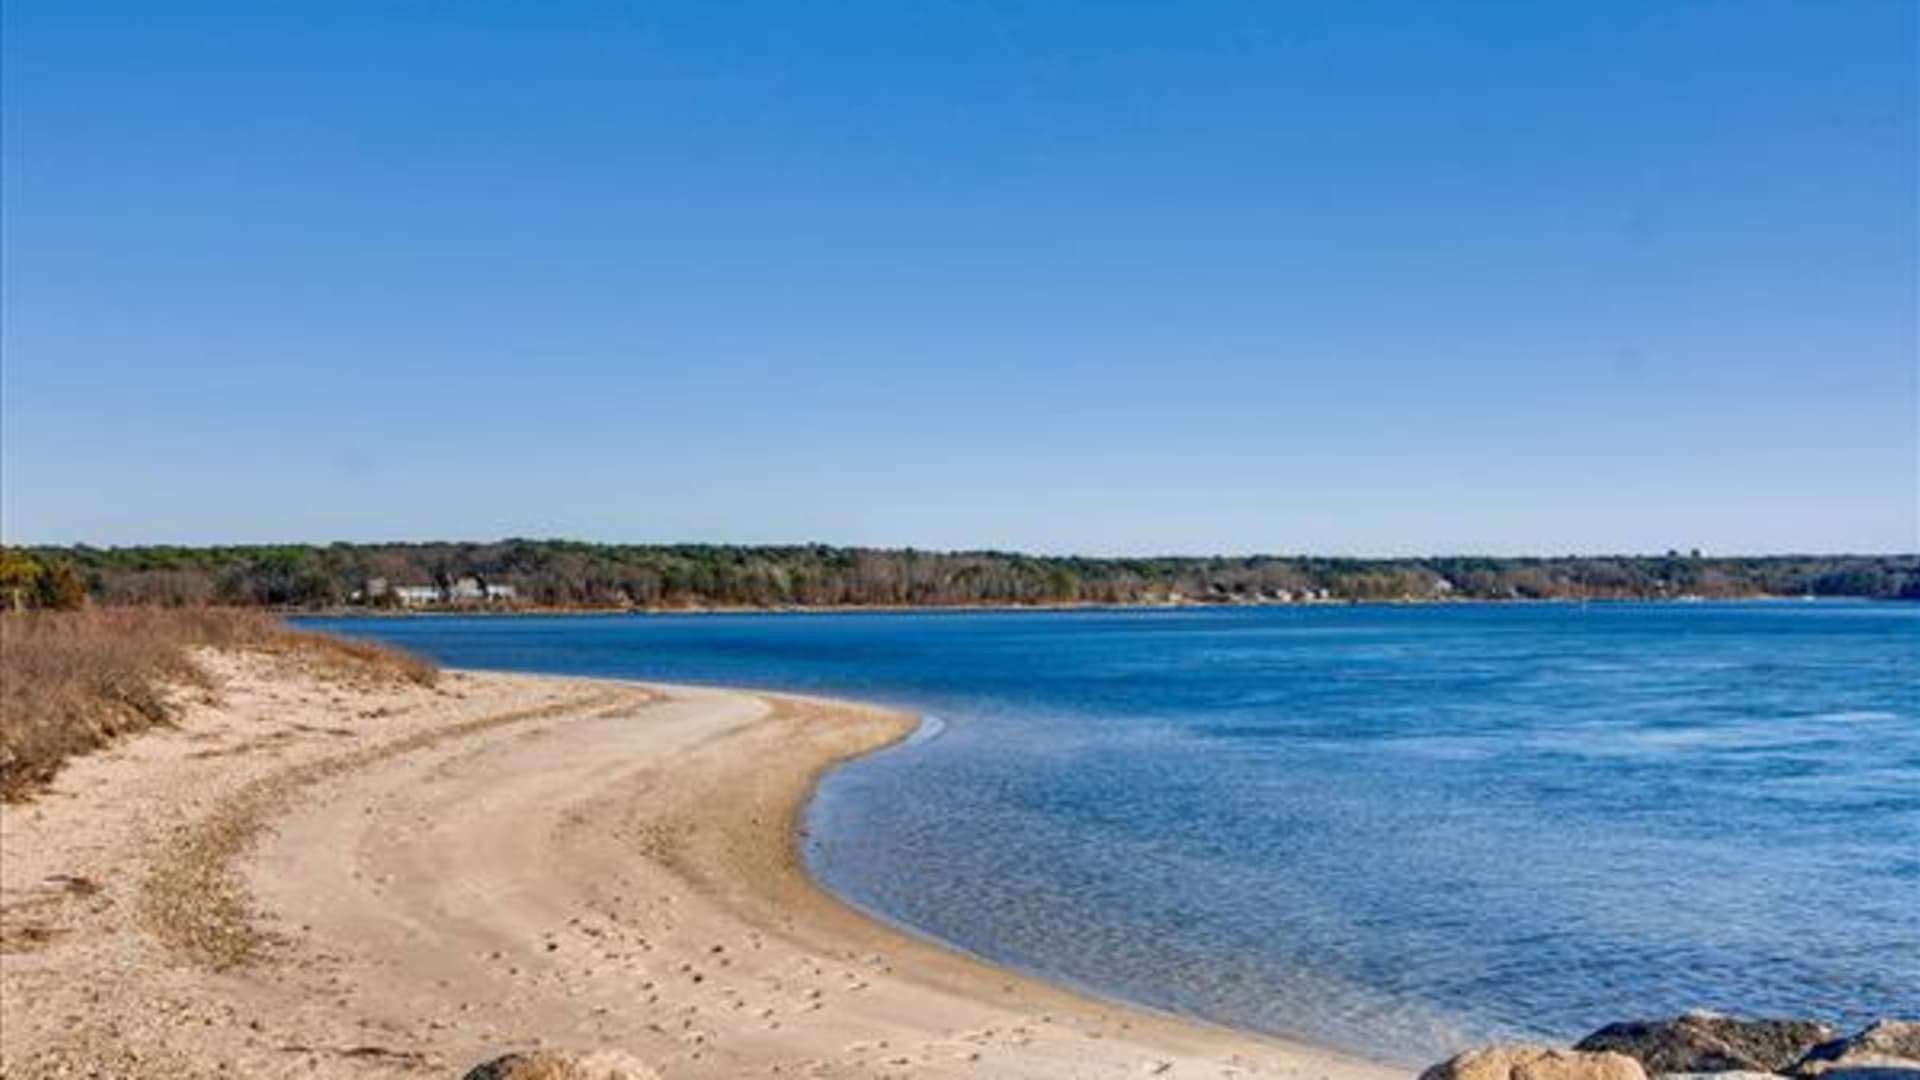 The Town Beach also opens onto Lake Tashmoo, a lovely place to go clamming and search for shells and treasure as well as swim.